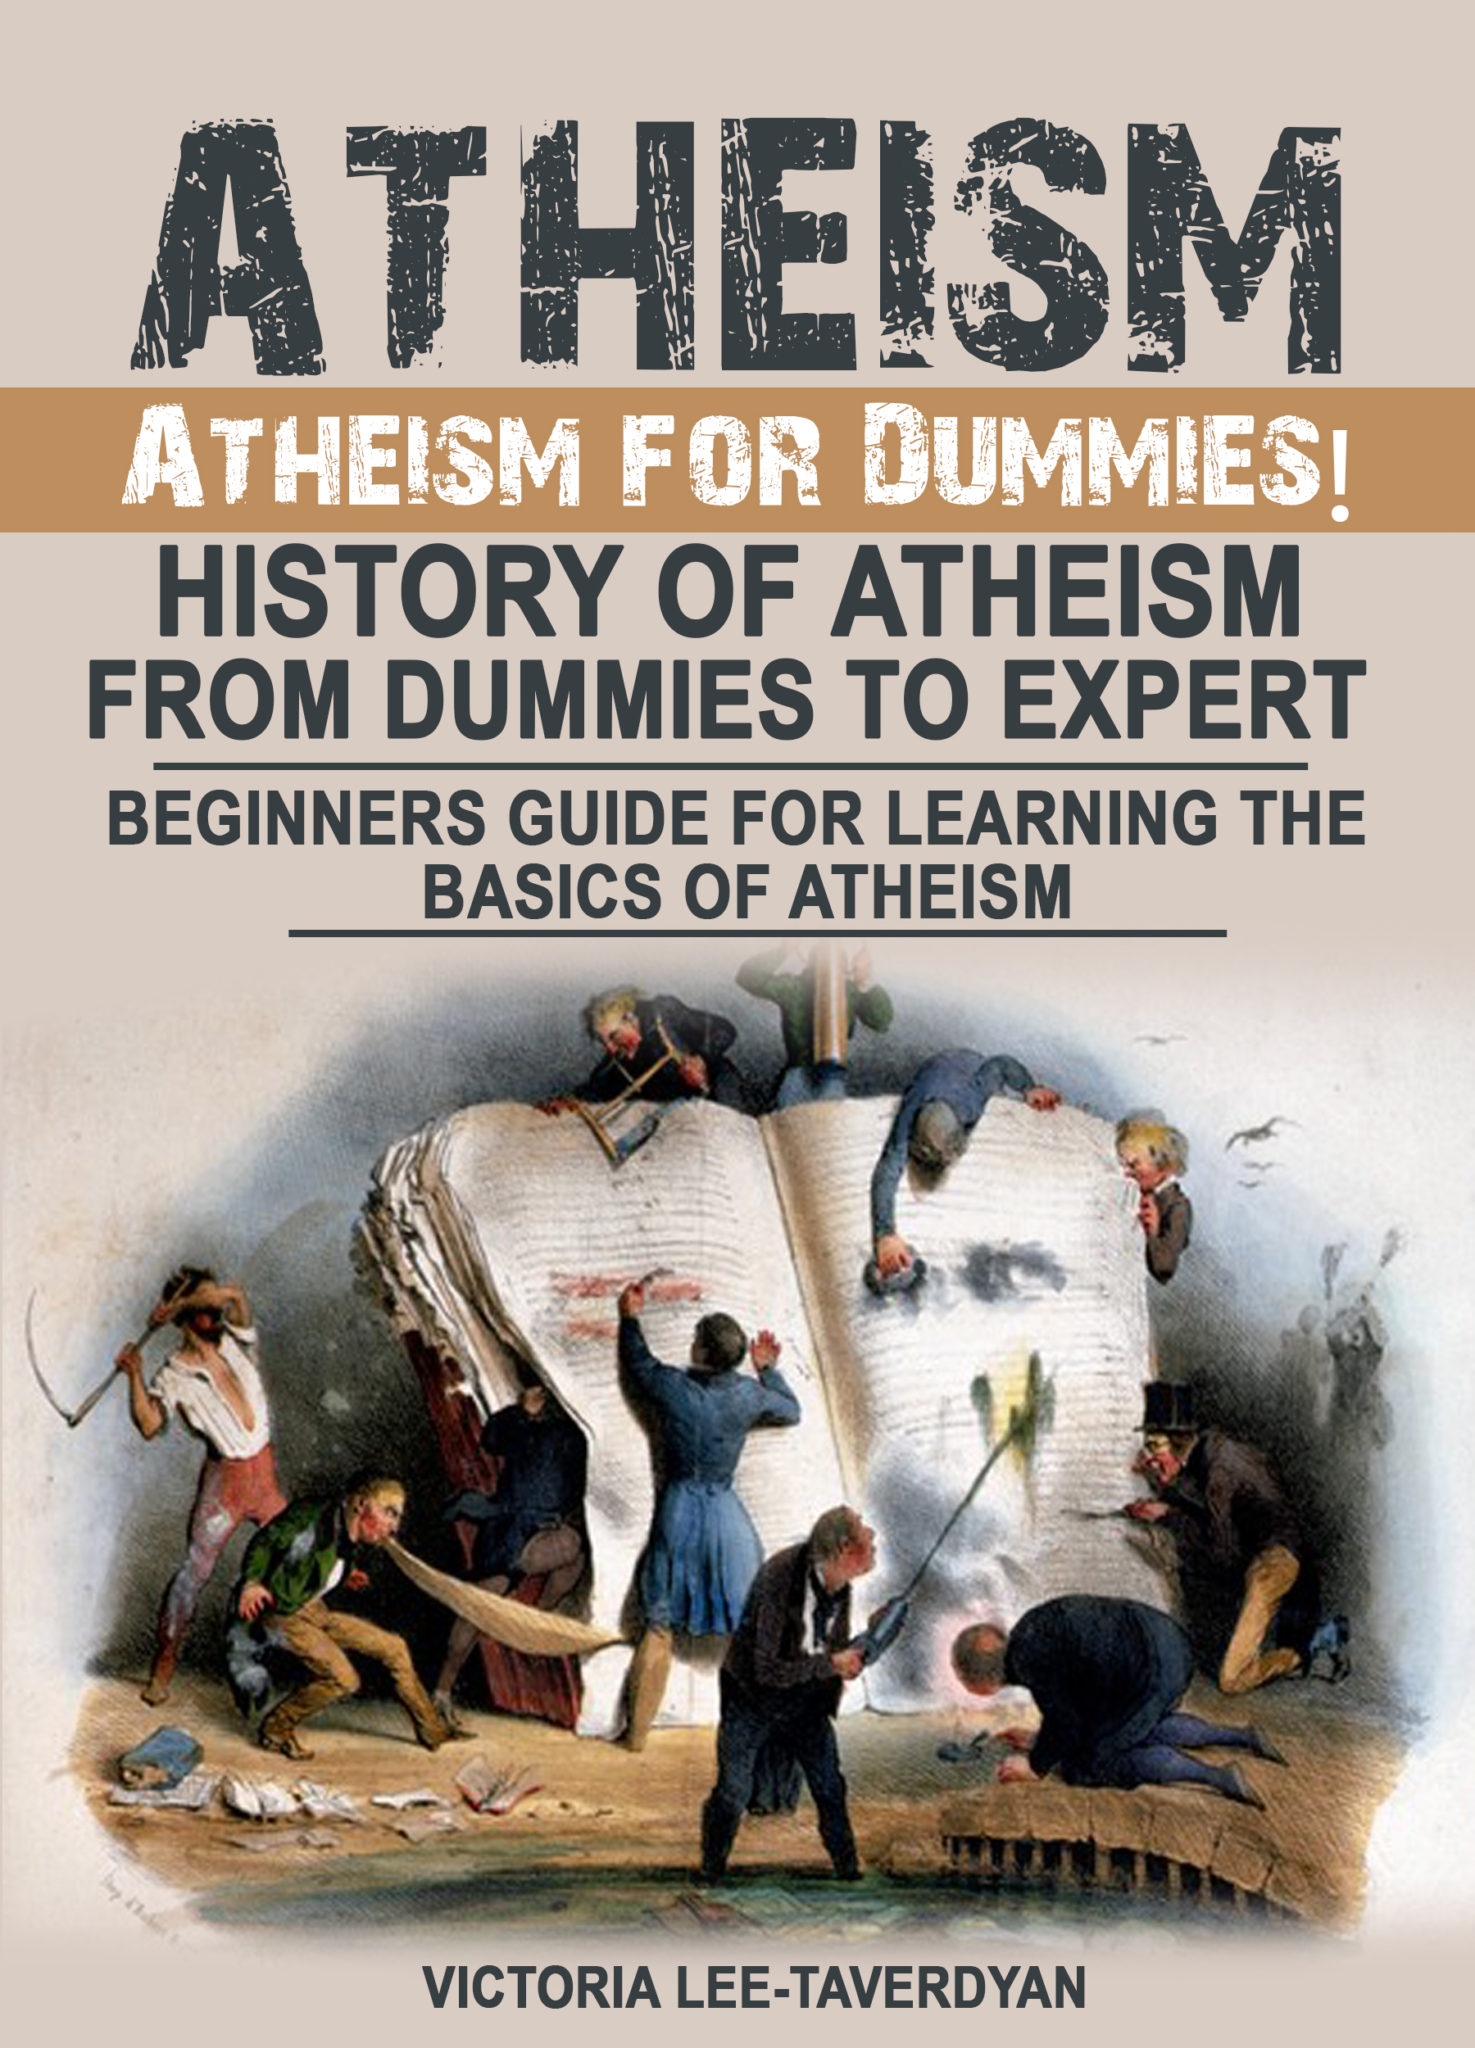 FREE: ATHEISM: Atheism for Dummies! History of Atheism. From Dummies to Expert. Beginners Guide for Learning the Basics of Atheism by Victoria Lee-Taverdyan